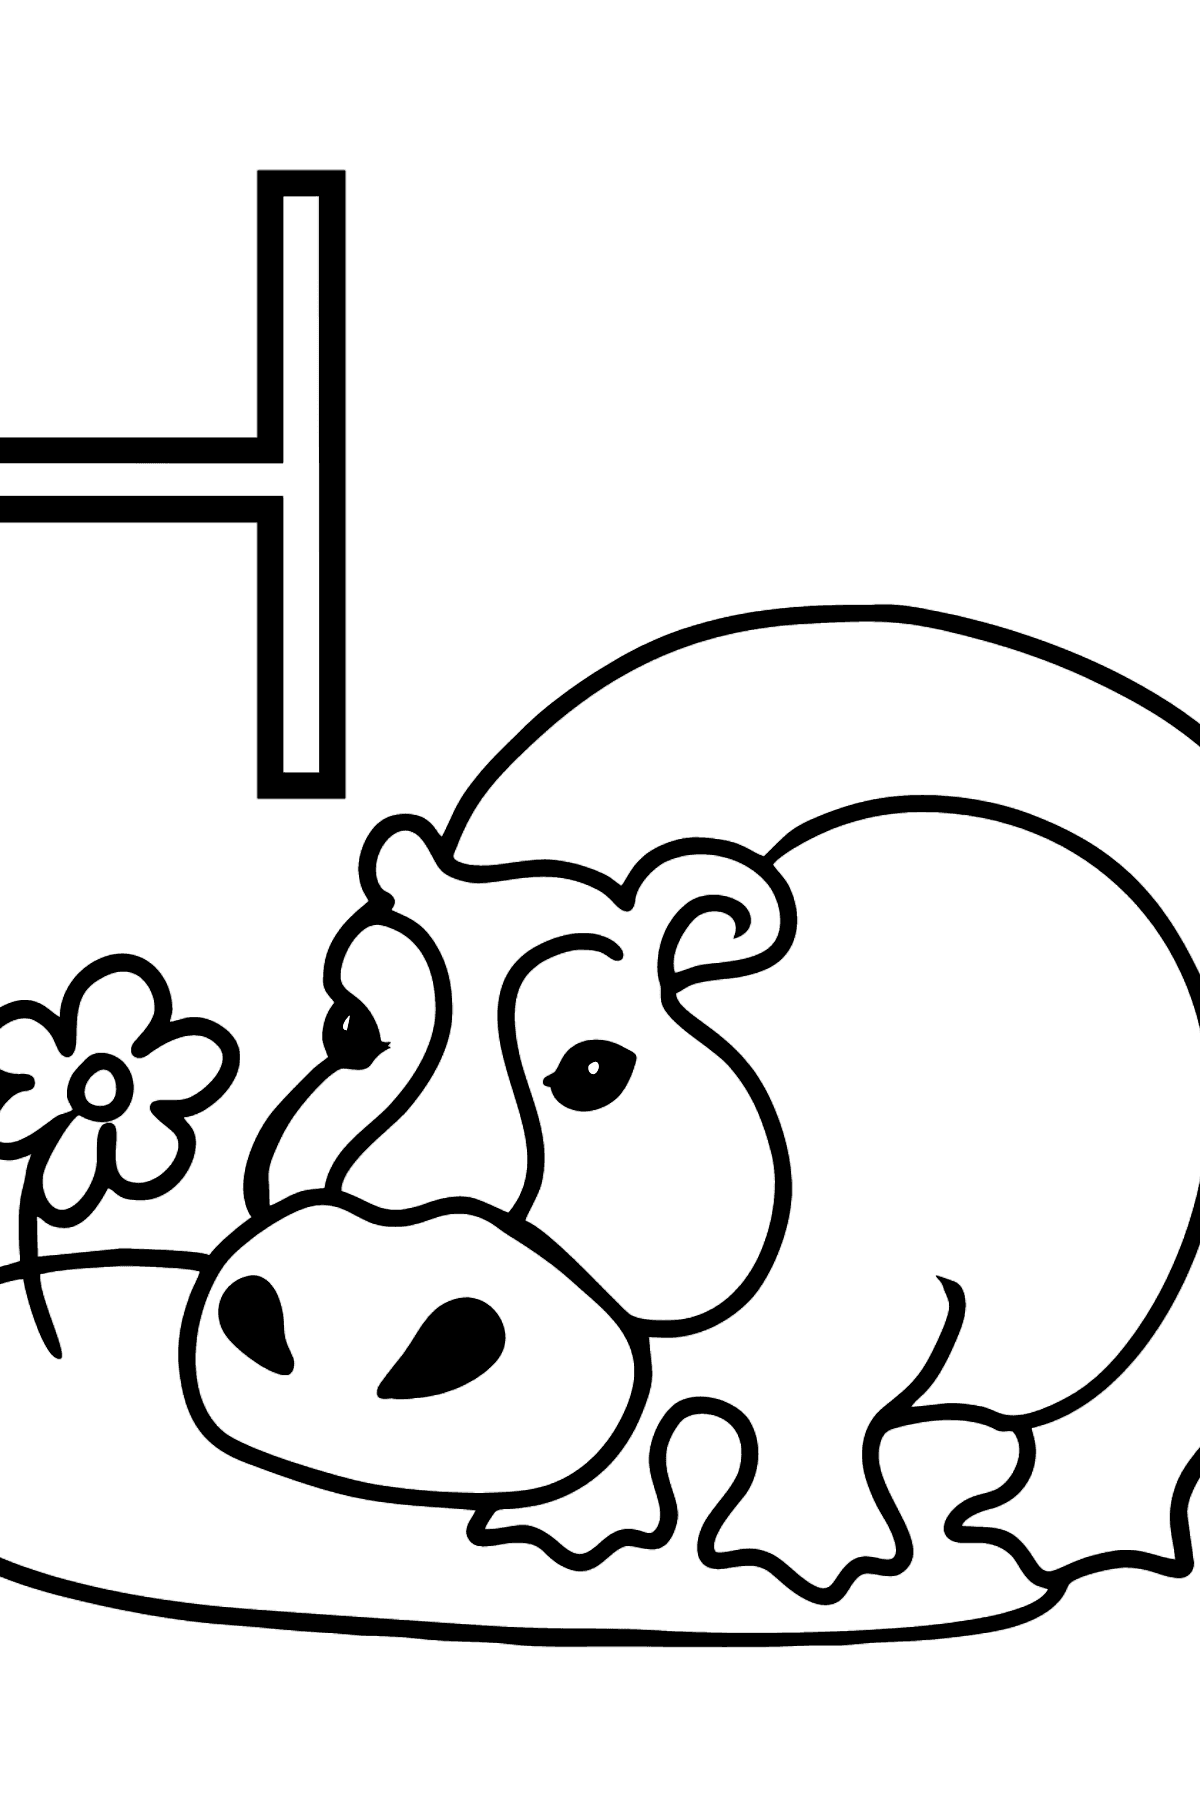 French Letter H coloring pages - HIPPOPOTAME - Coloring Pages for Kids